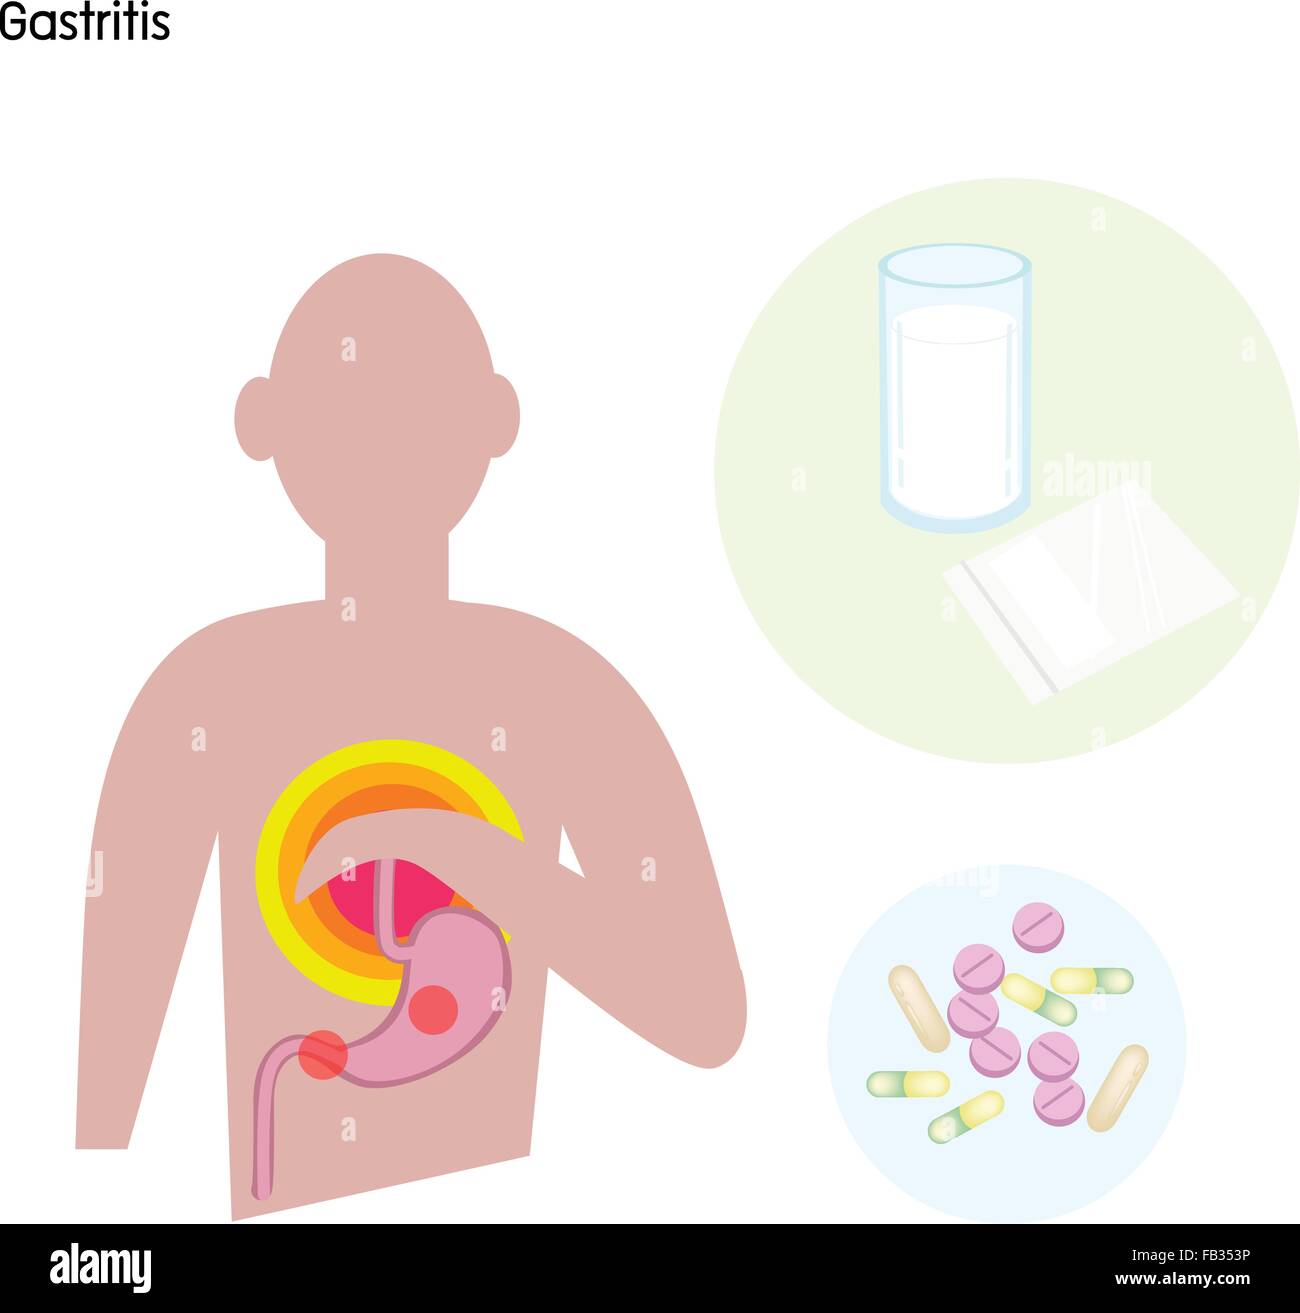 Medical Concept, Illustration of Gastritis Caused by Excessive Alcohol, Caffein, Nicotine, Chronic Vomiting, Stress and Certain Stock Vector